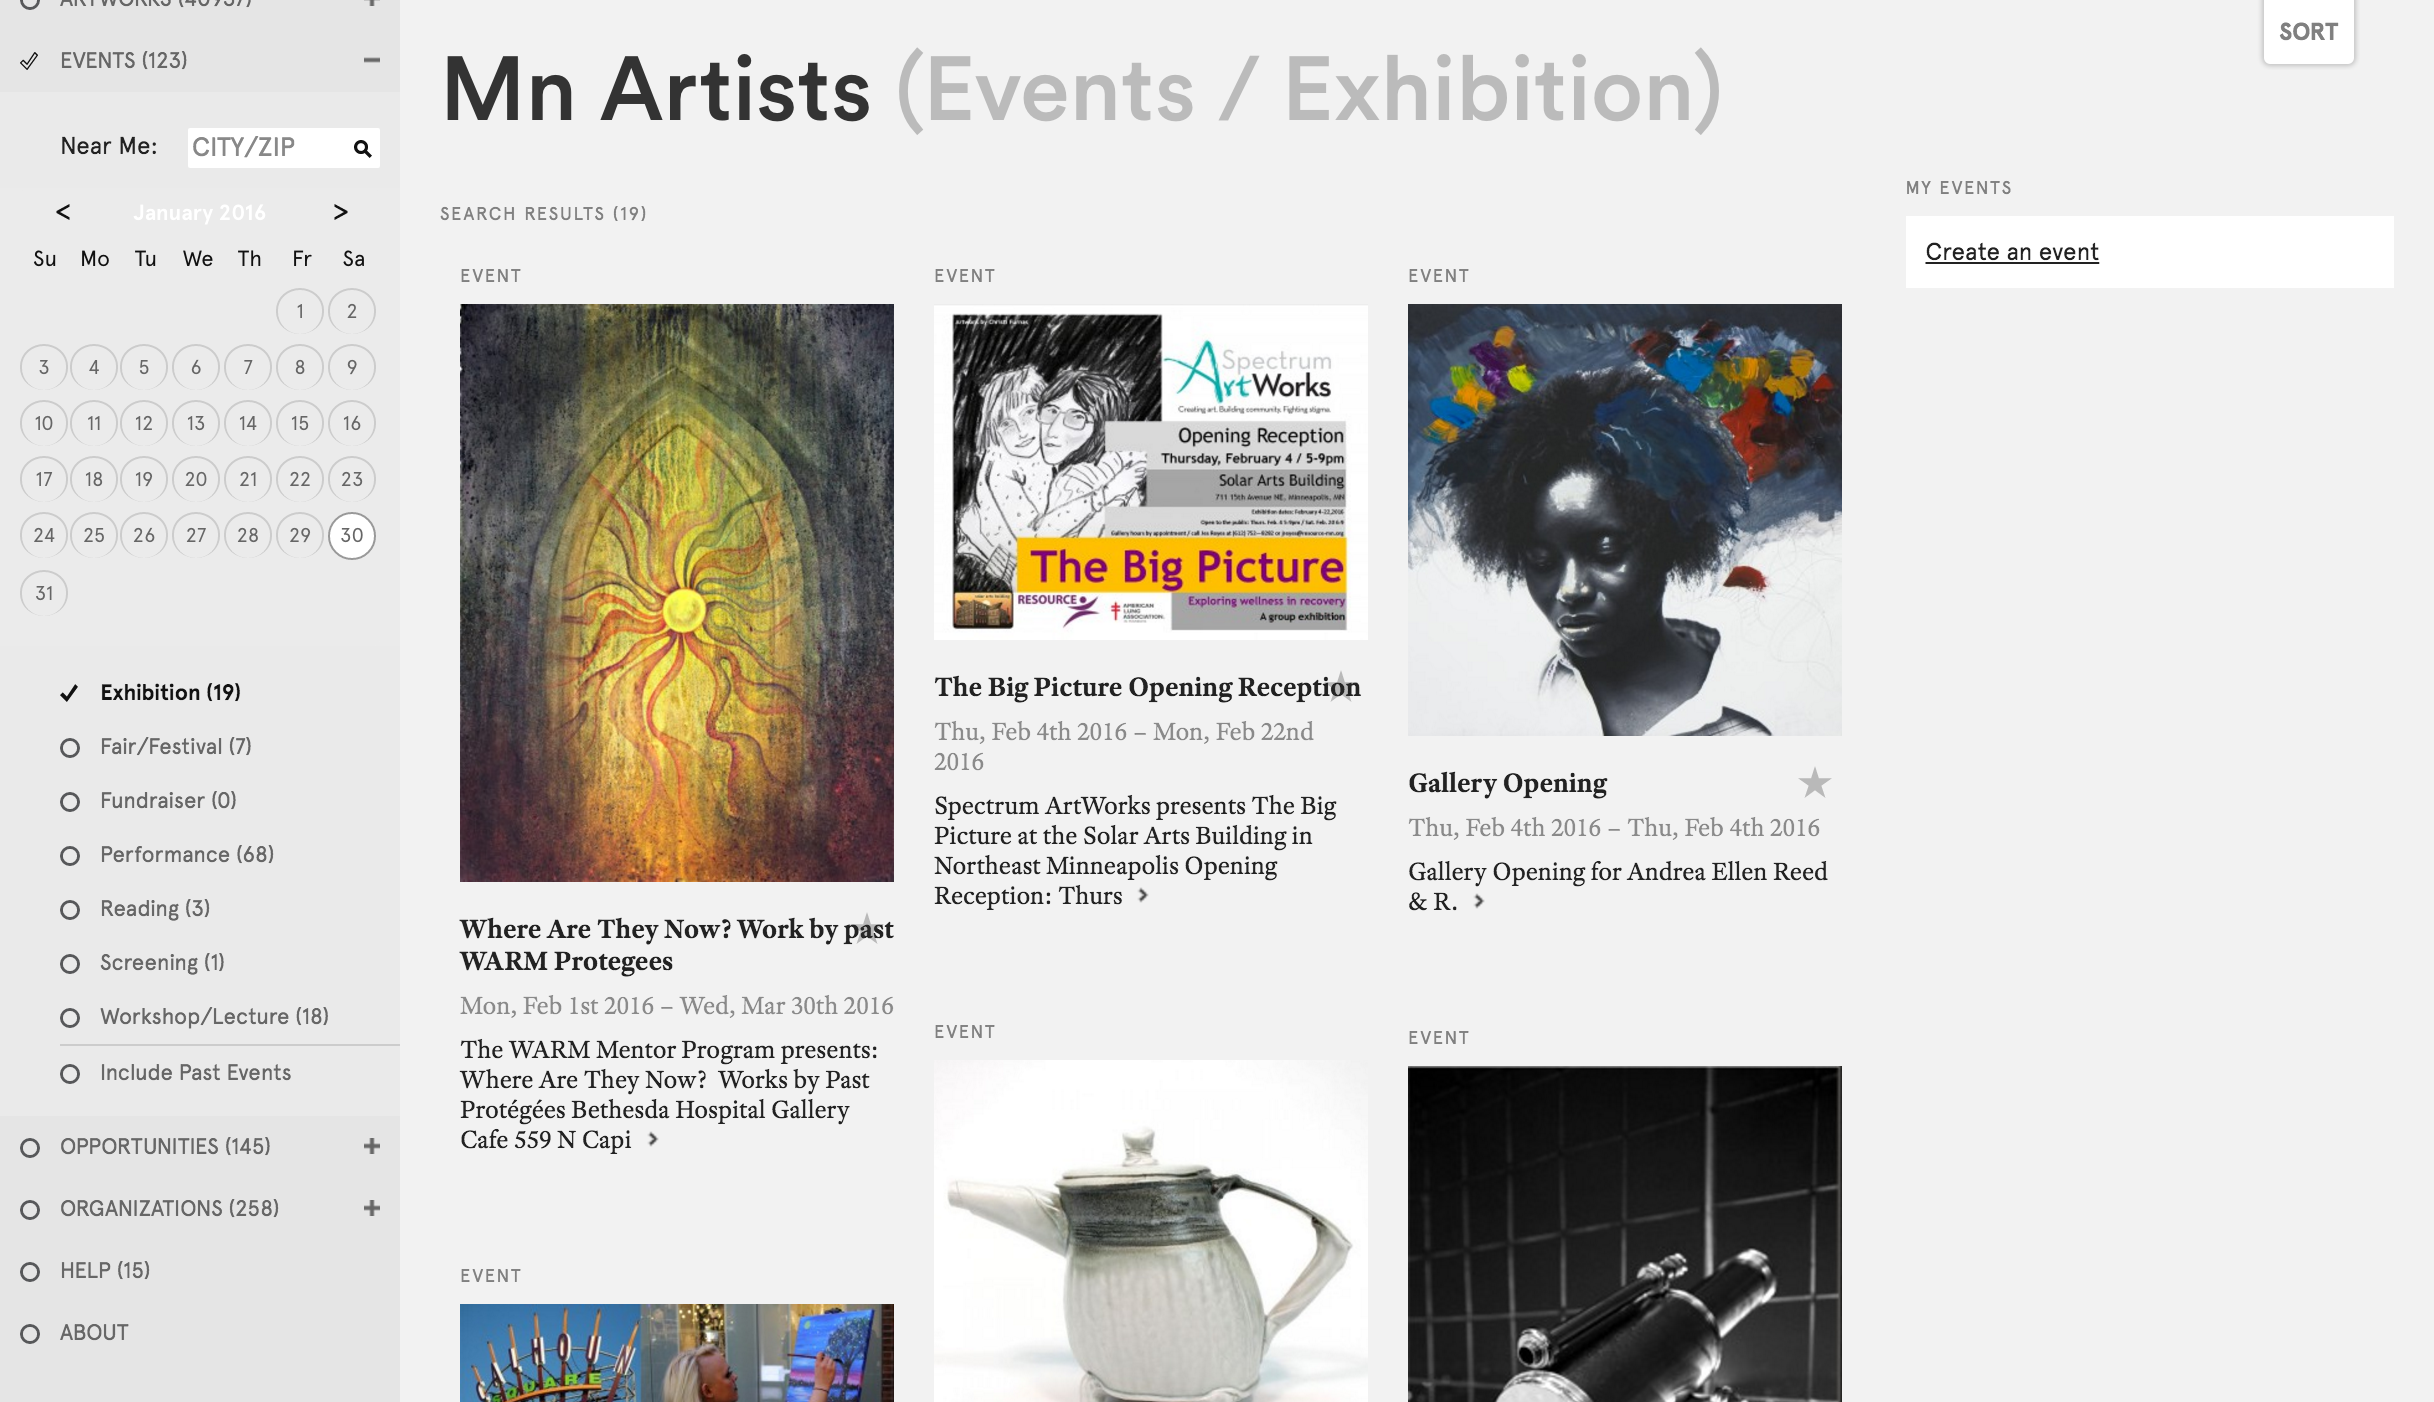 Figure 7: Mn Artists, content filtered by “Events” and “Exhibitions”